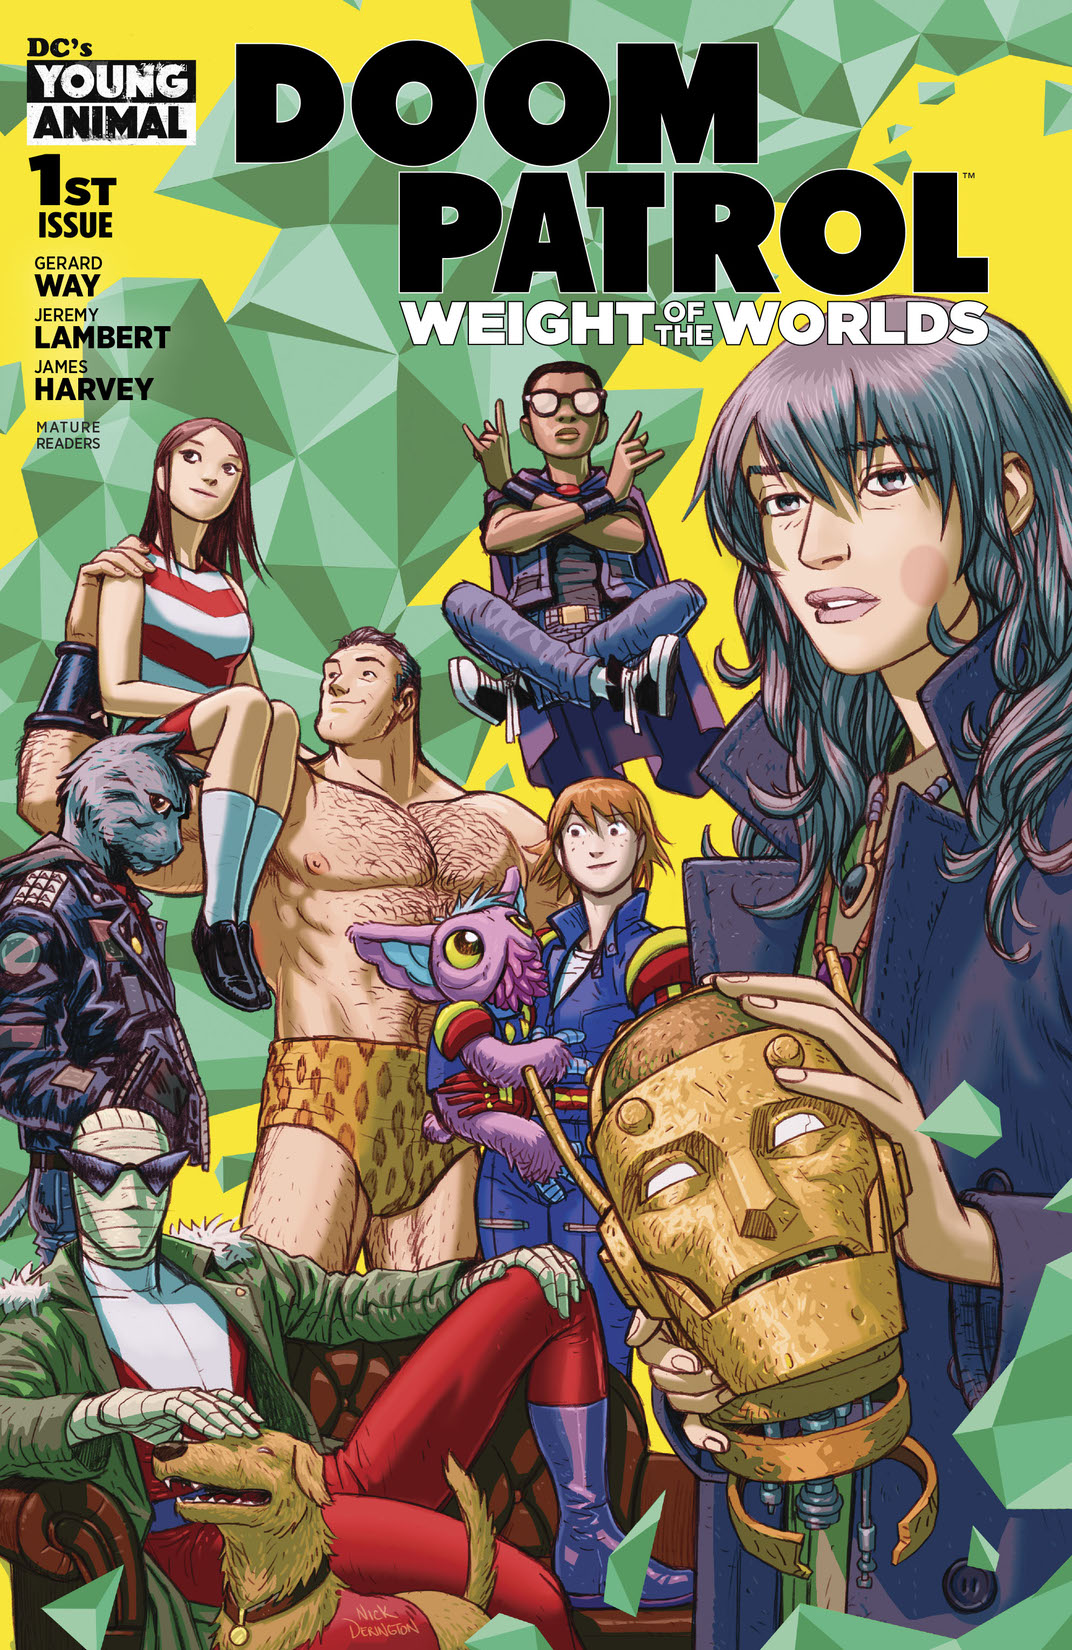 Doom Patrol: Weight of the Worlds #1 preview images